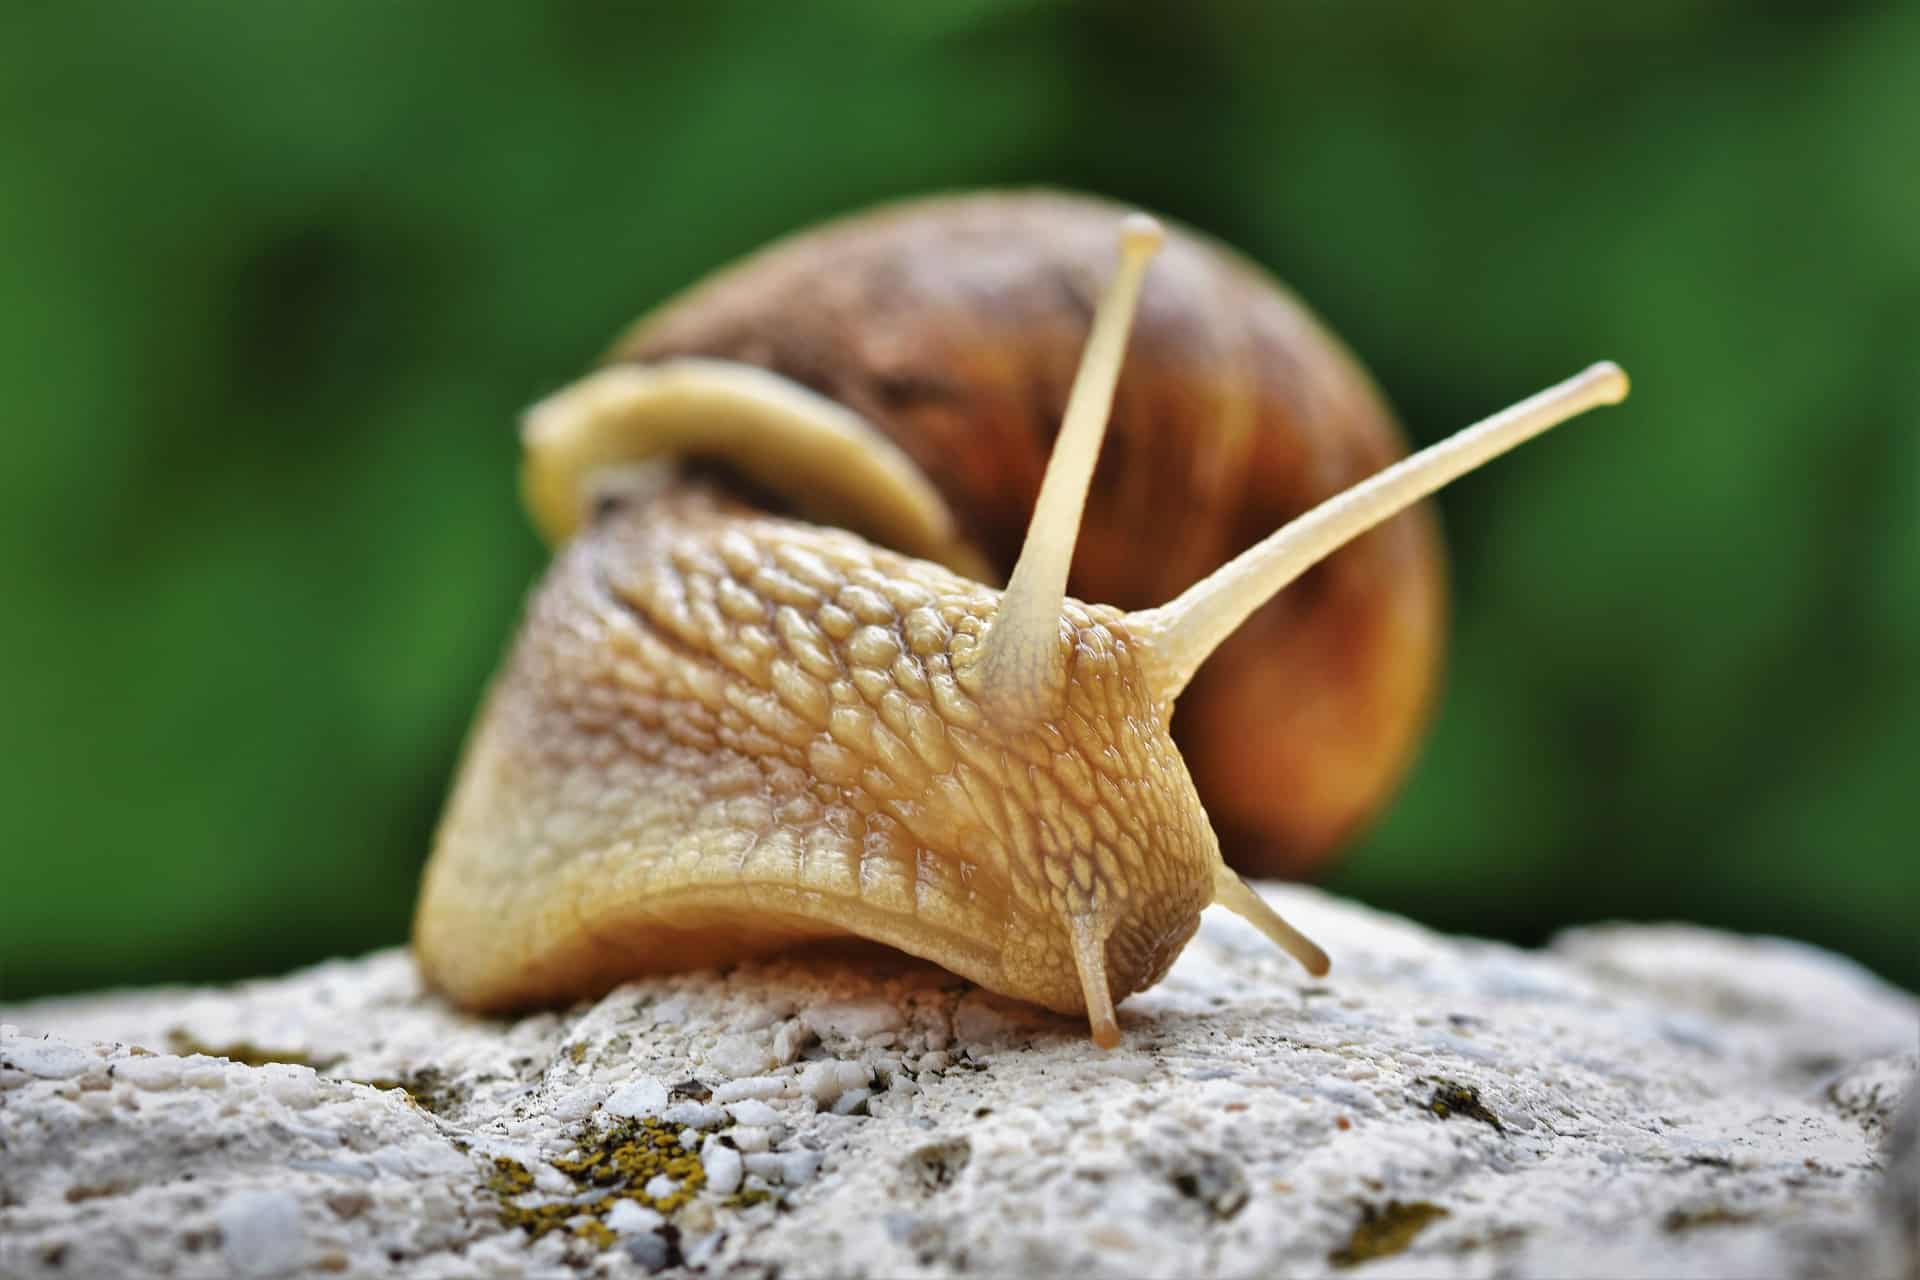 What are some interesting facts you didn't know about snails?